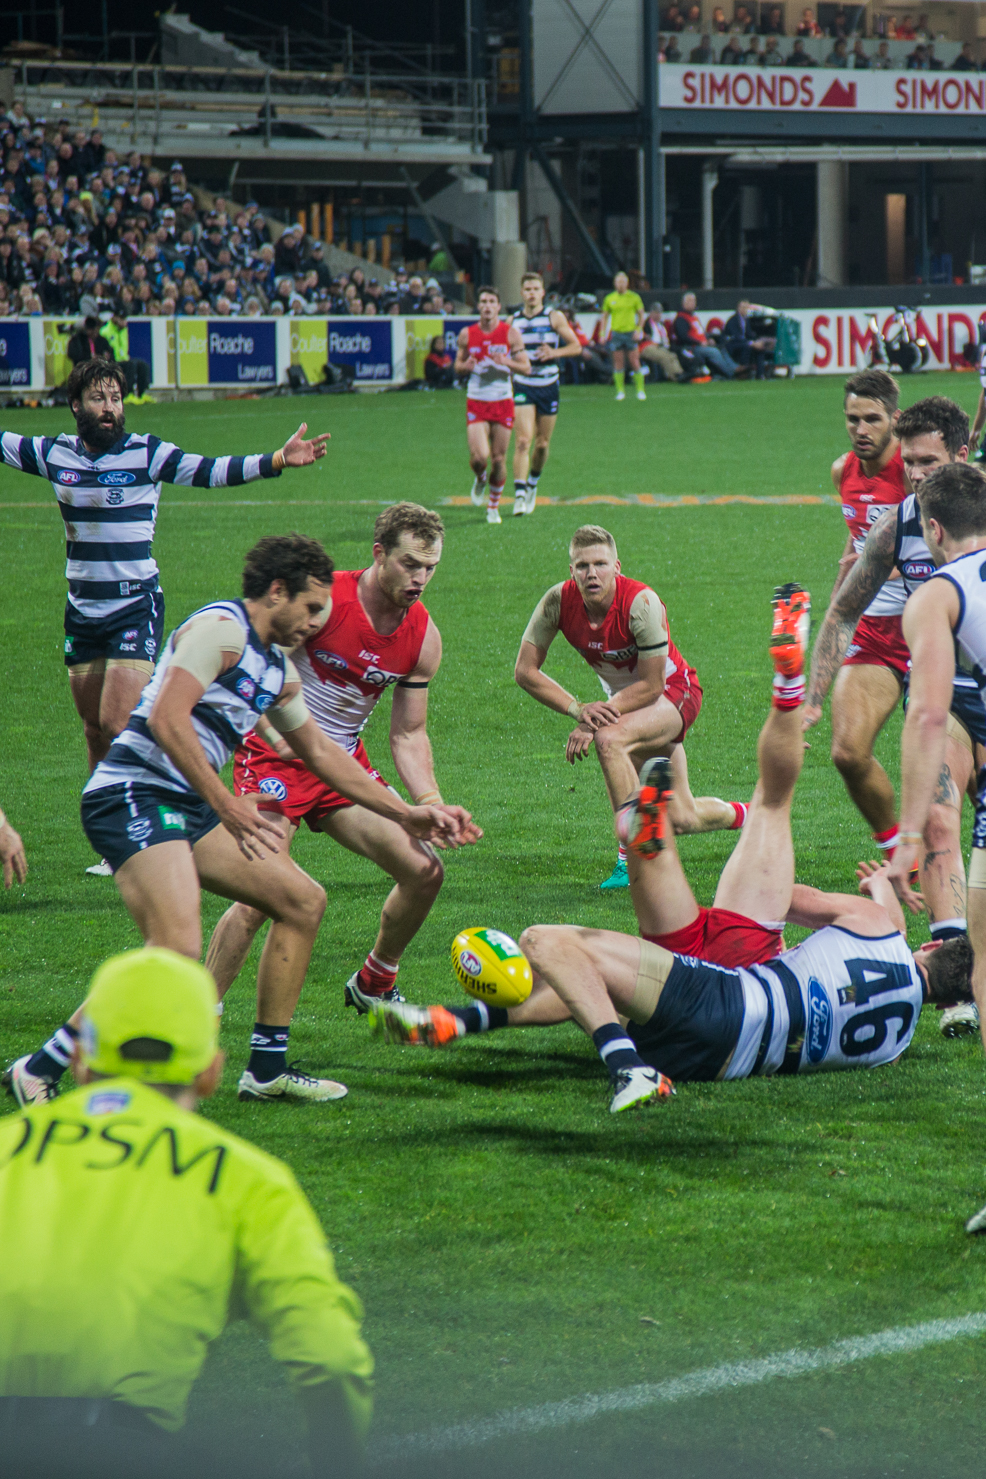 8th July 2016 - Photo a Day - Day 188 - My 2016 Diary - Geelong v Sydney